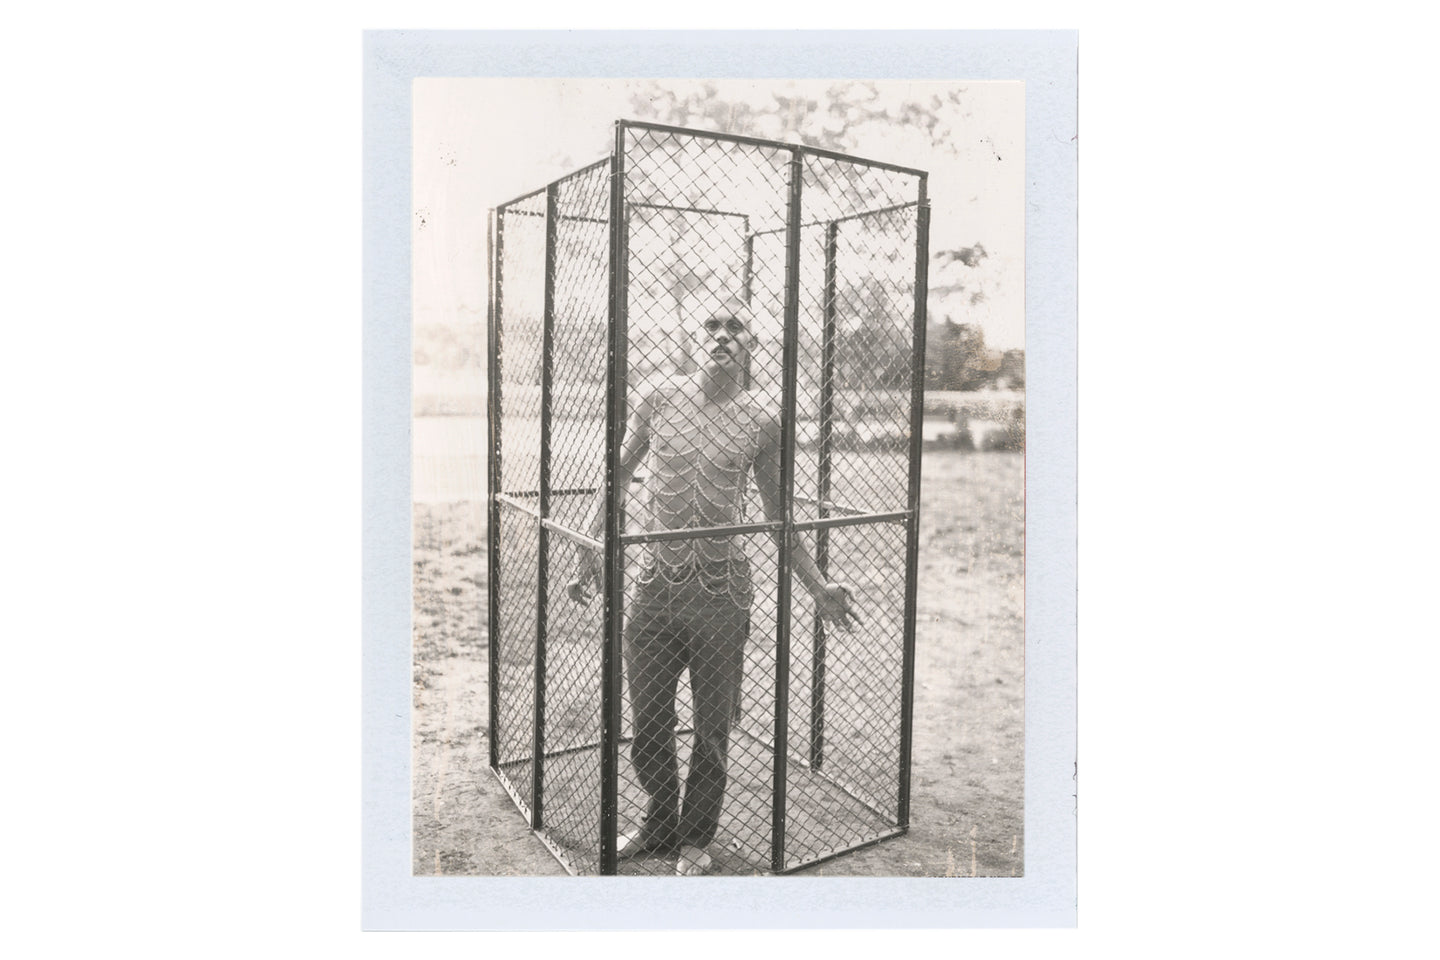 Boy in Cage, 1995